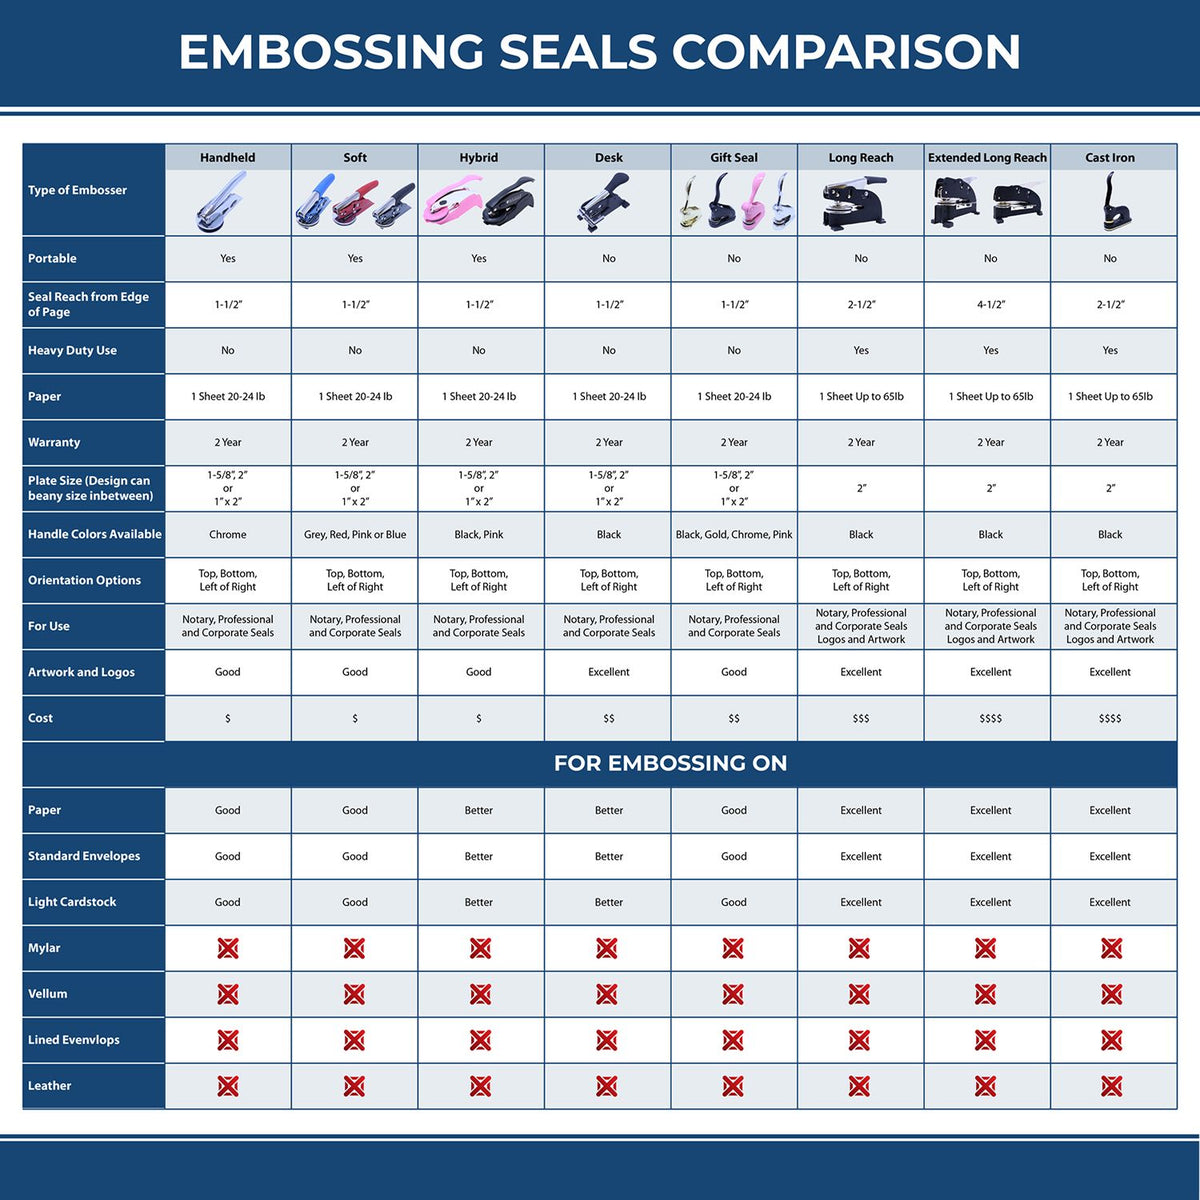 A comparison chart for the different types of mount models available for the Soft Pocket Connecticut Landscape Architect Embosser.